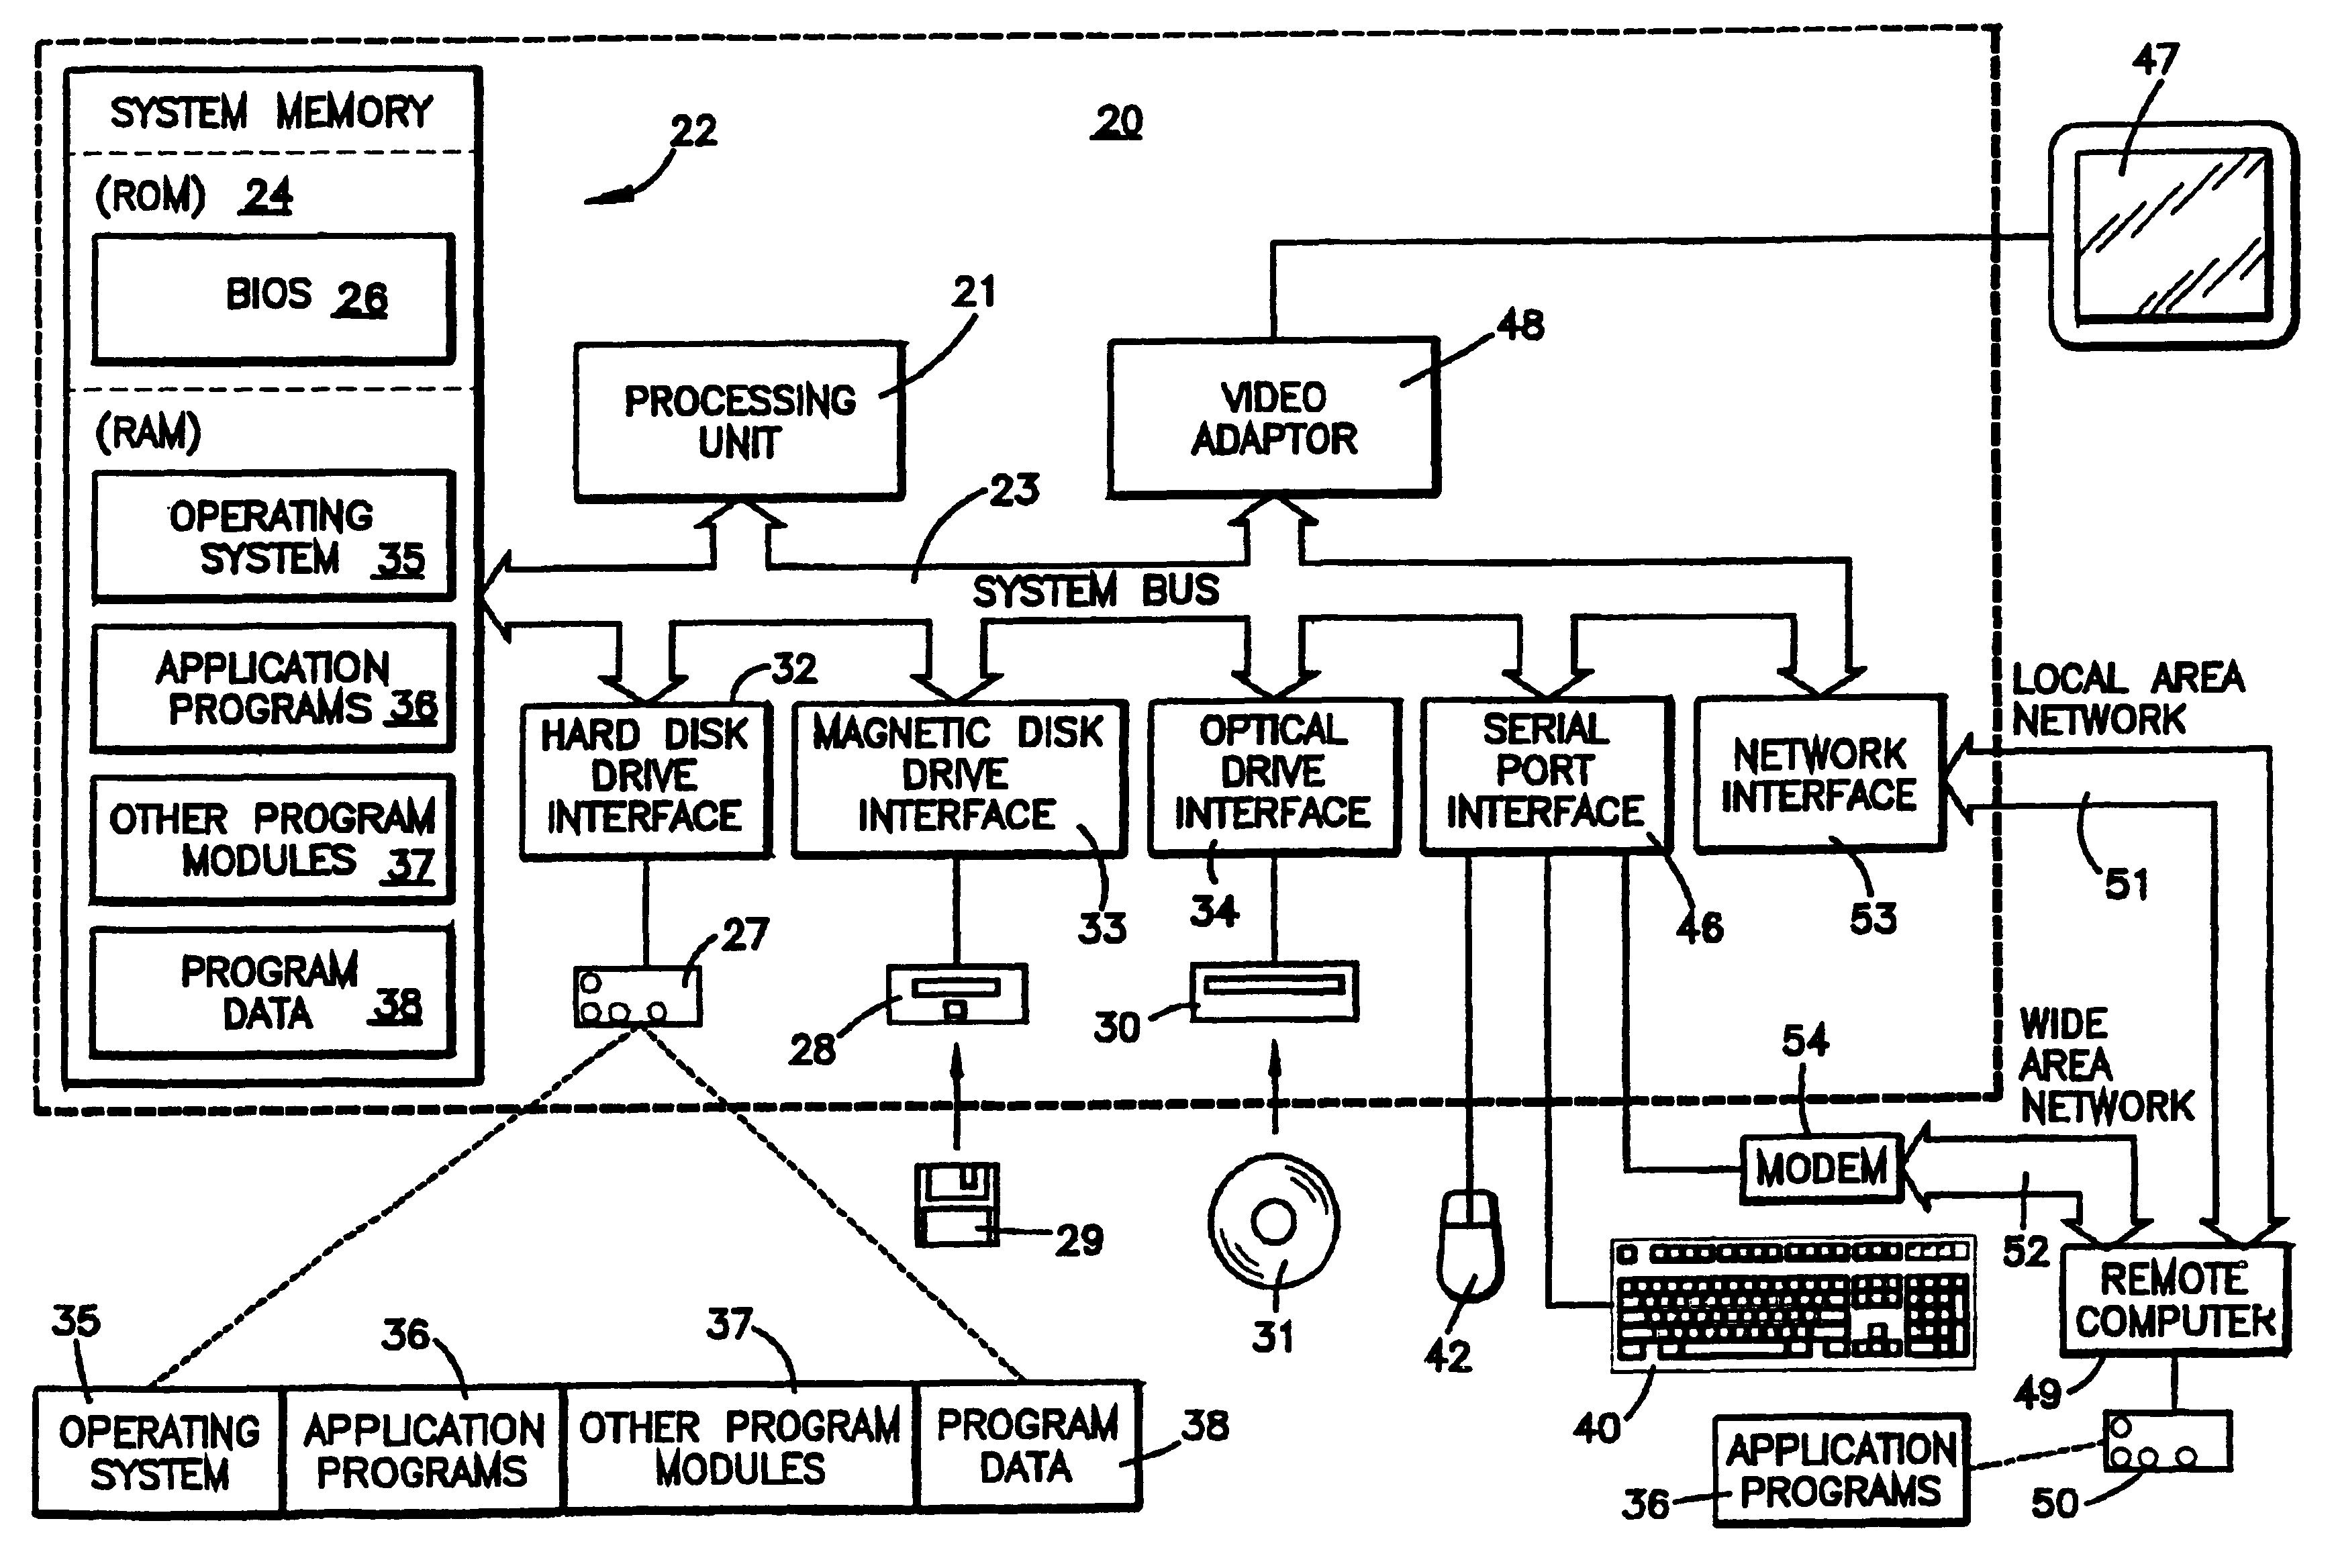 Method for test optimization using historical and actual fabrication test data